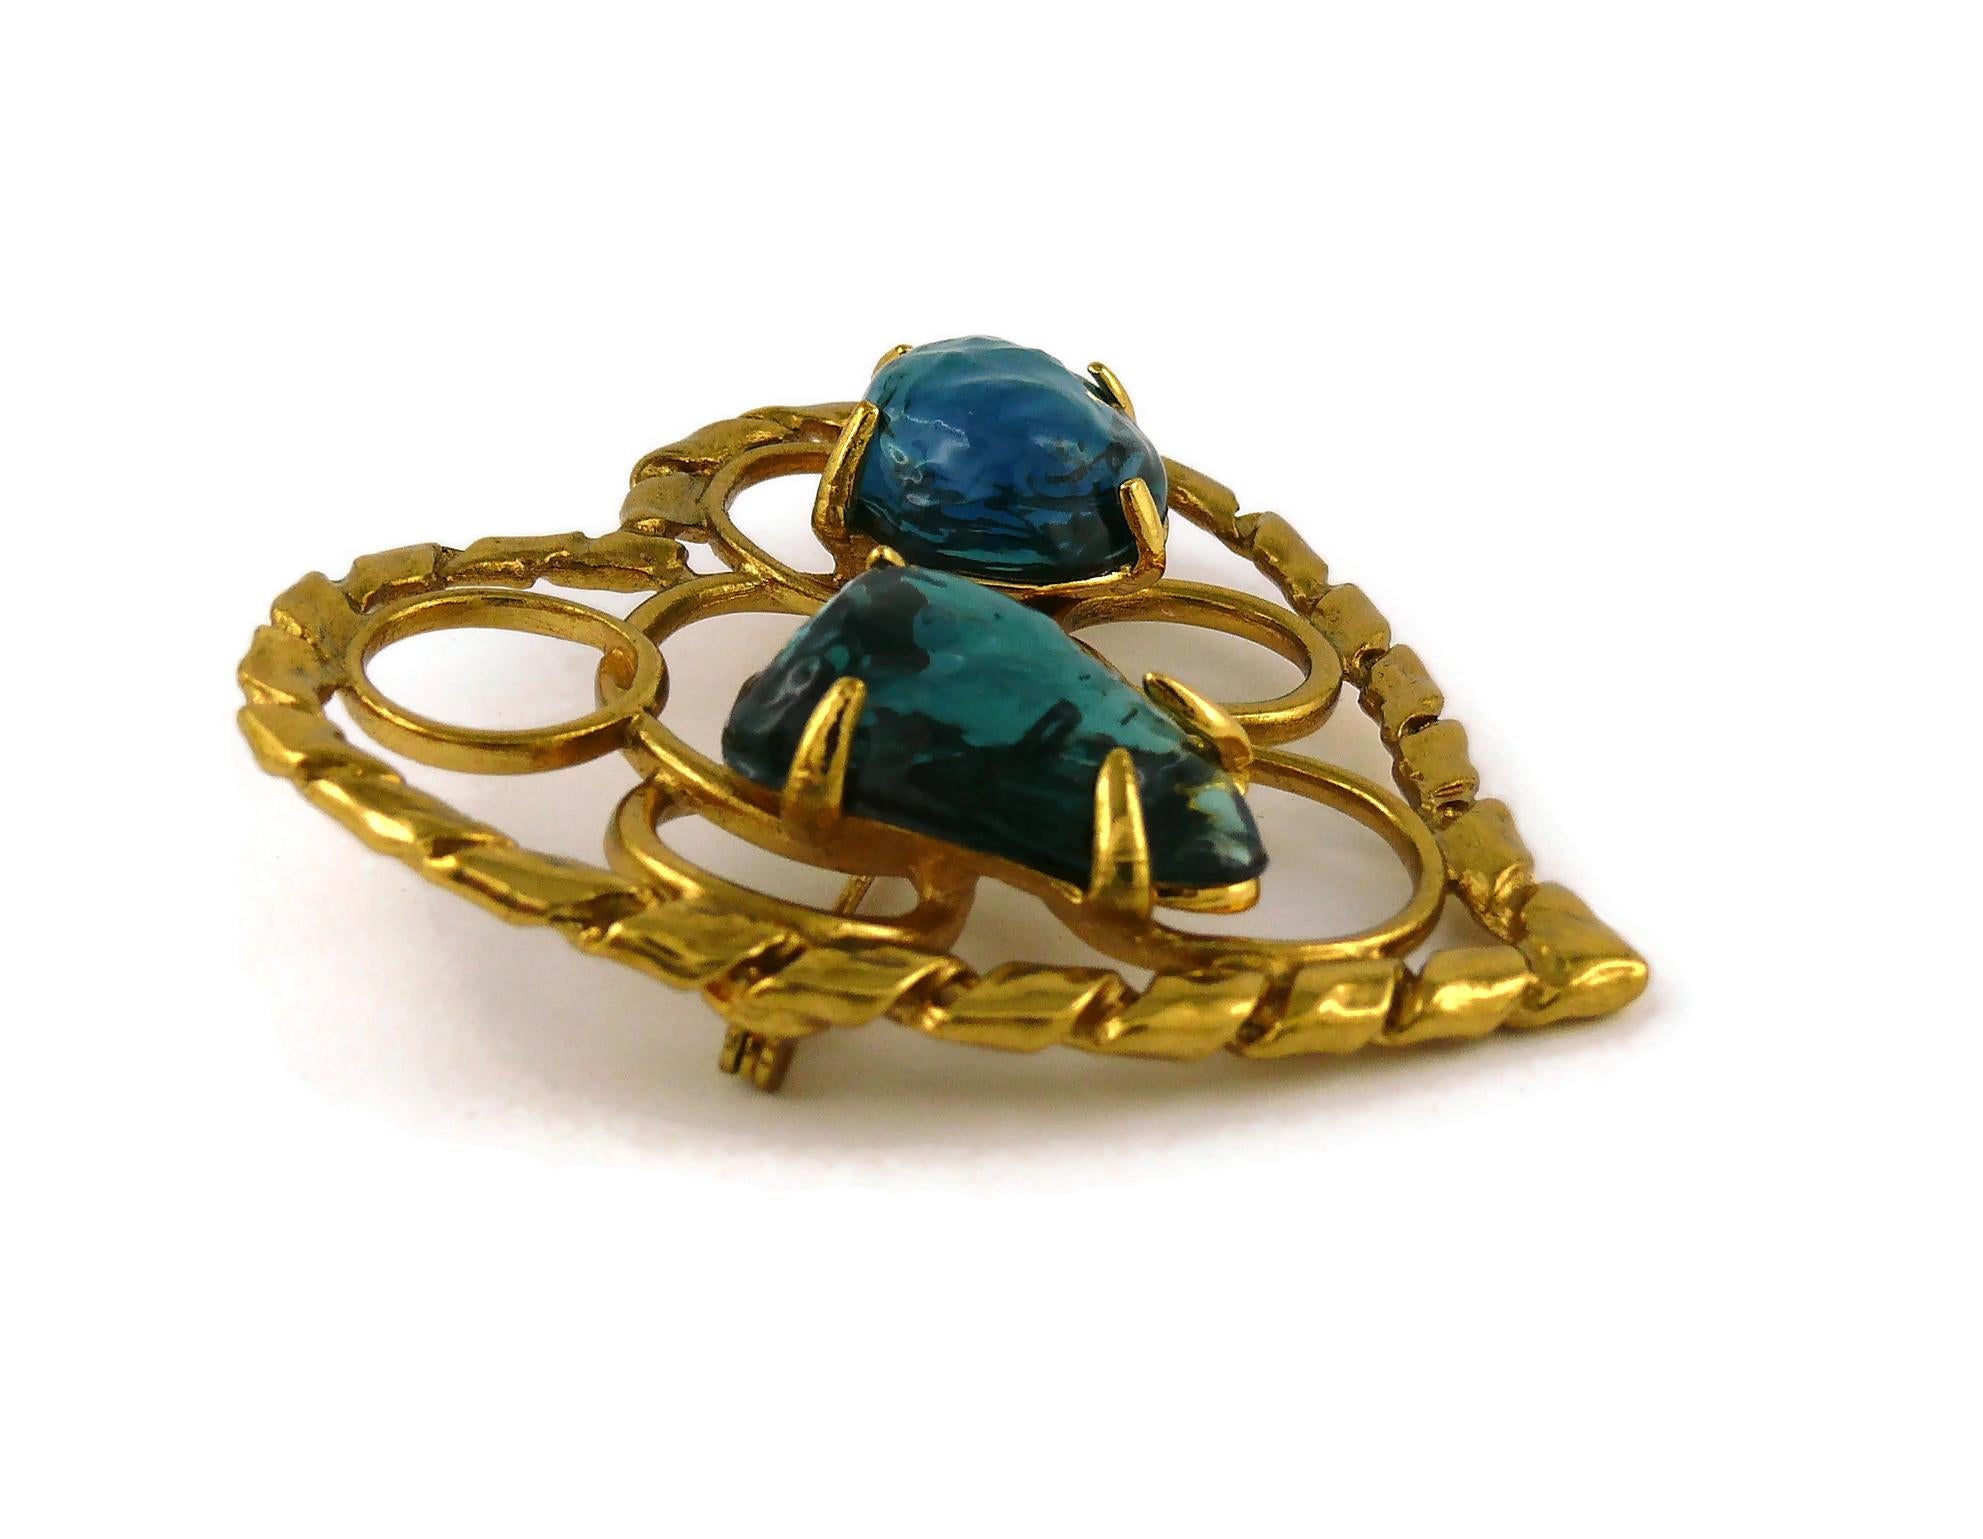 YVES SAINT LAURENT vintage large openwork gold toned heart brooch embellished with poured resin in blue colour.

Embossed YSL Made in France.

Indicative measurements : max. height approx. 6.2 cm (2.44 inches) / max. width approx. 6.4 cm (2.52